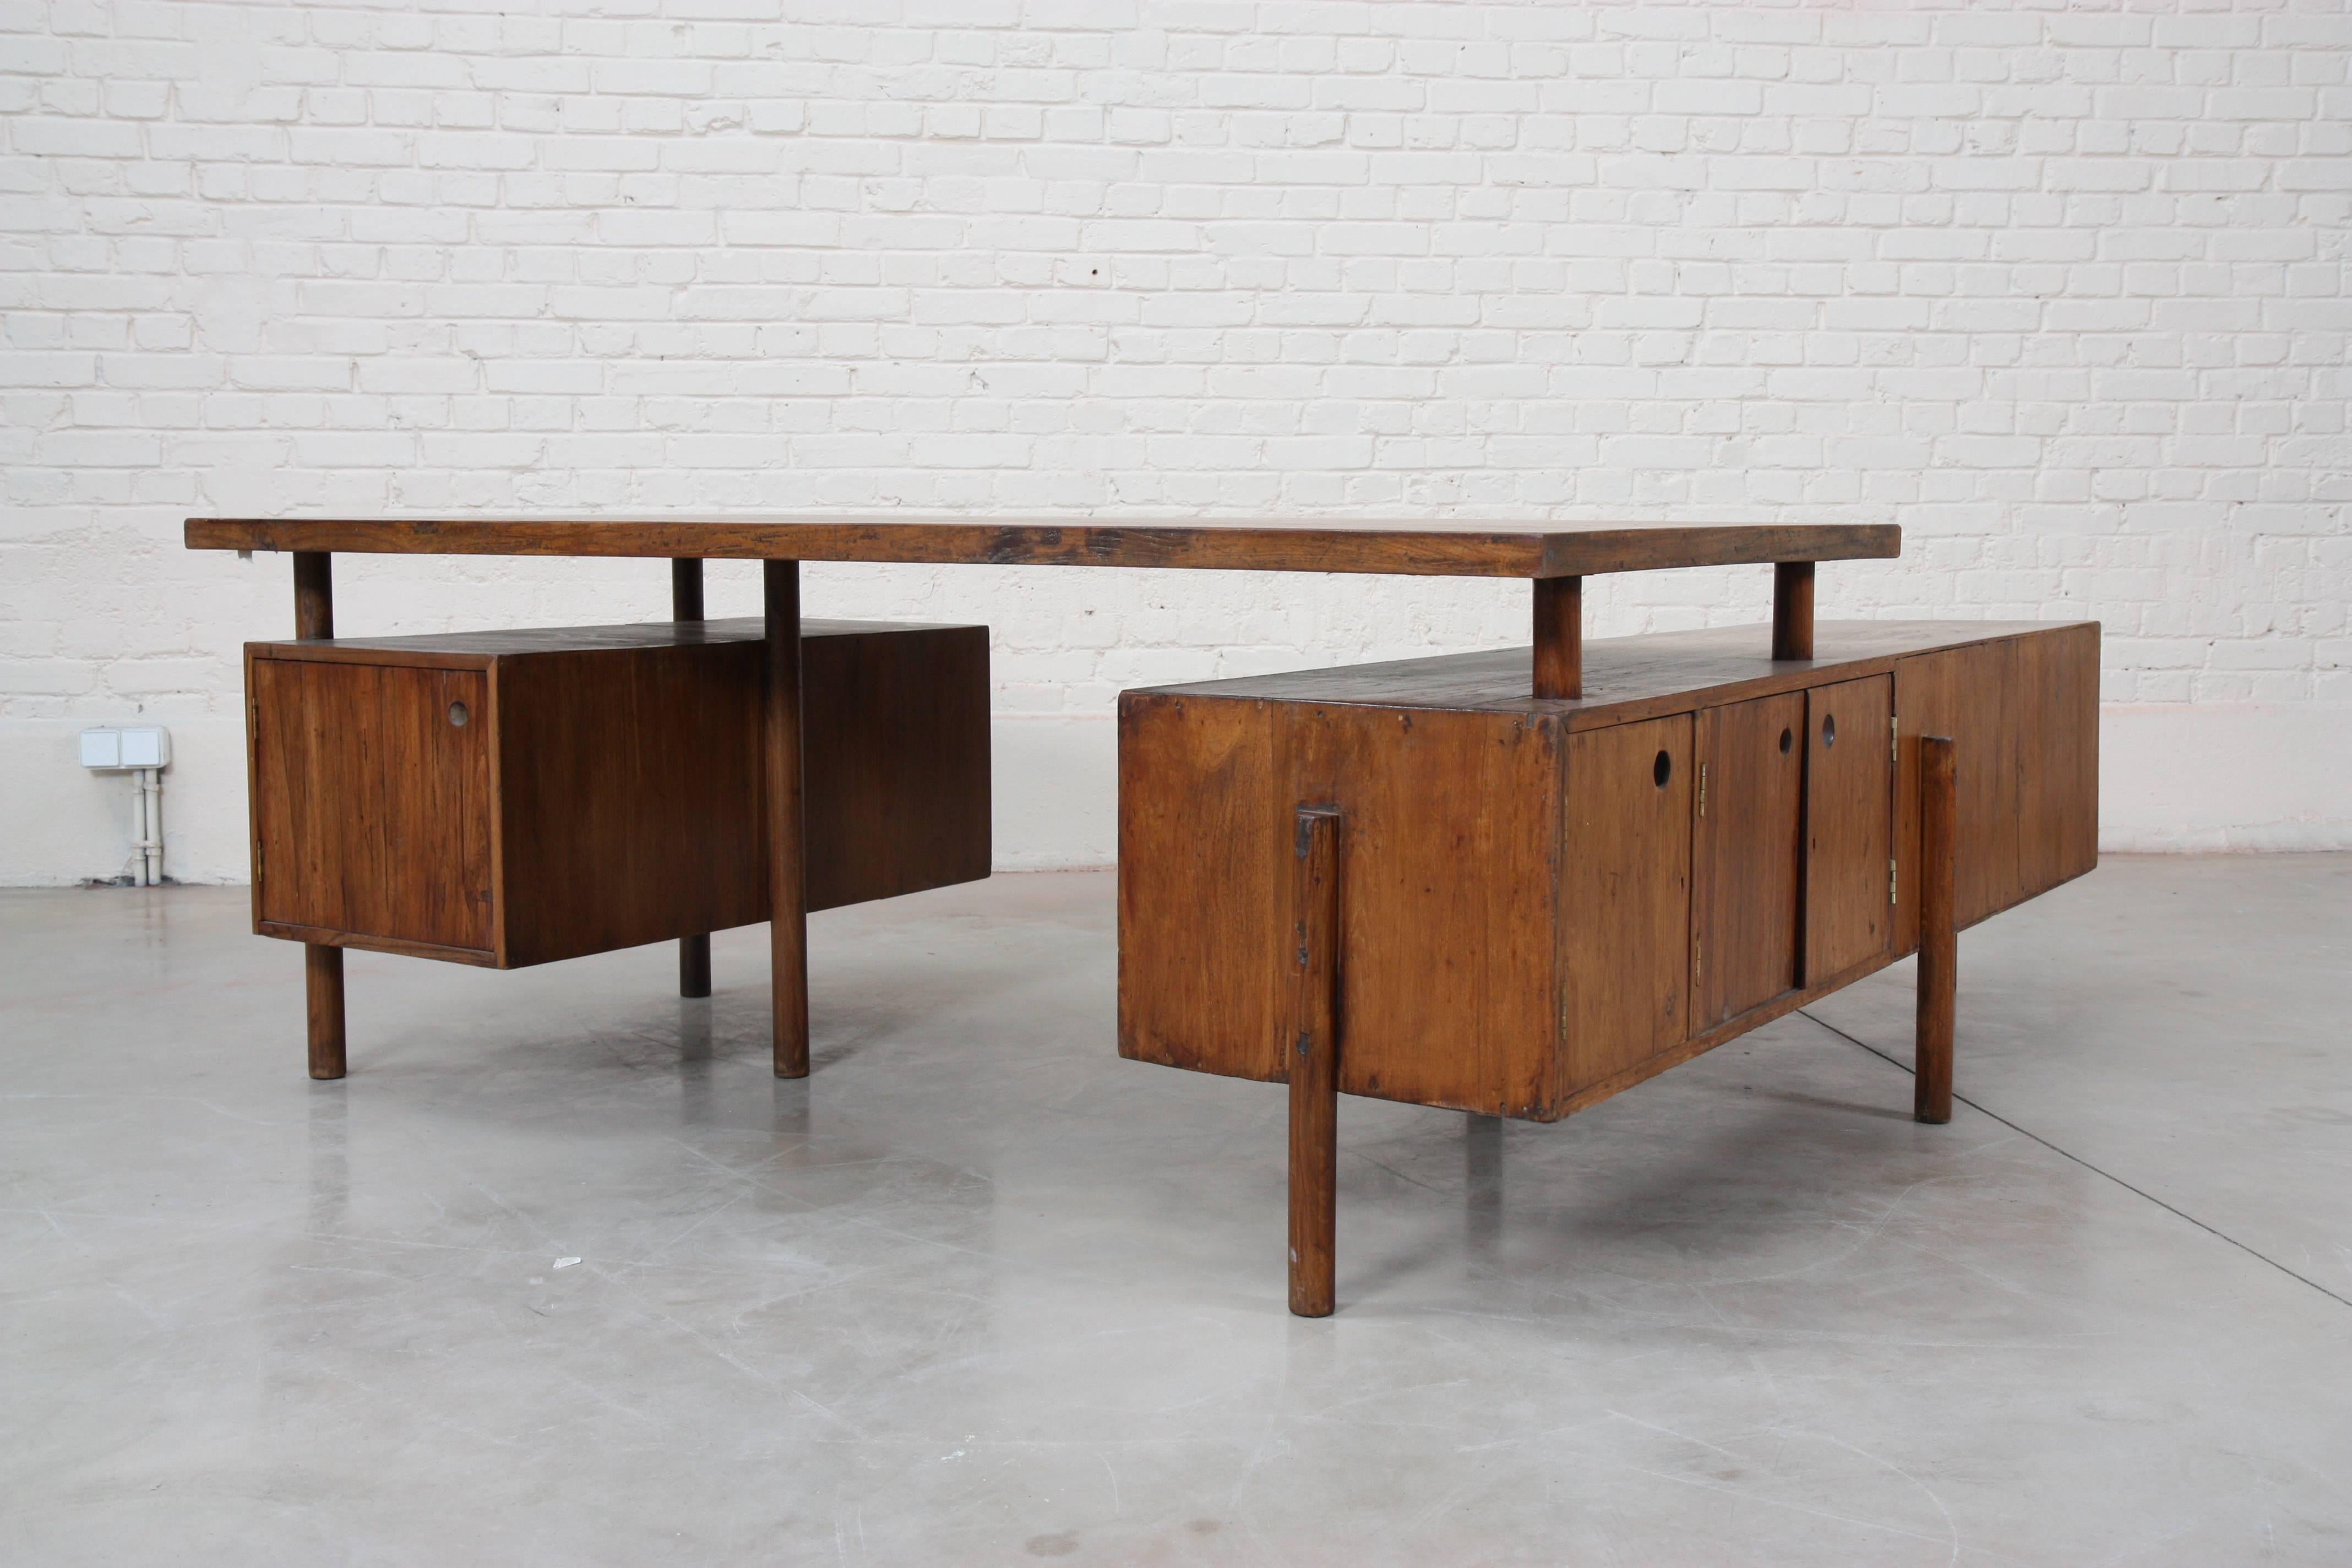 Indian Executive Administrative Desk by Pierre Jeanneret